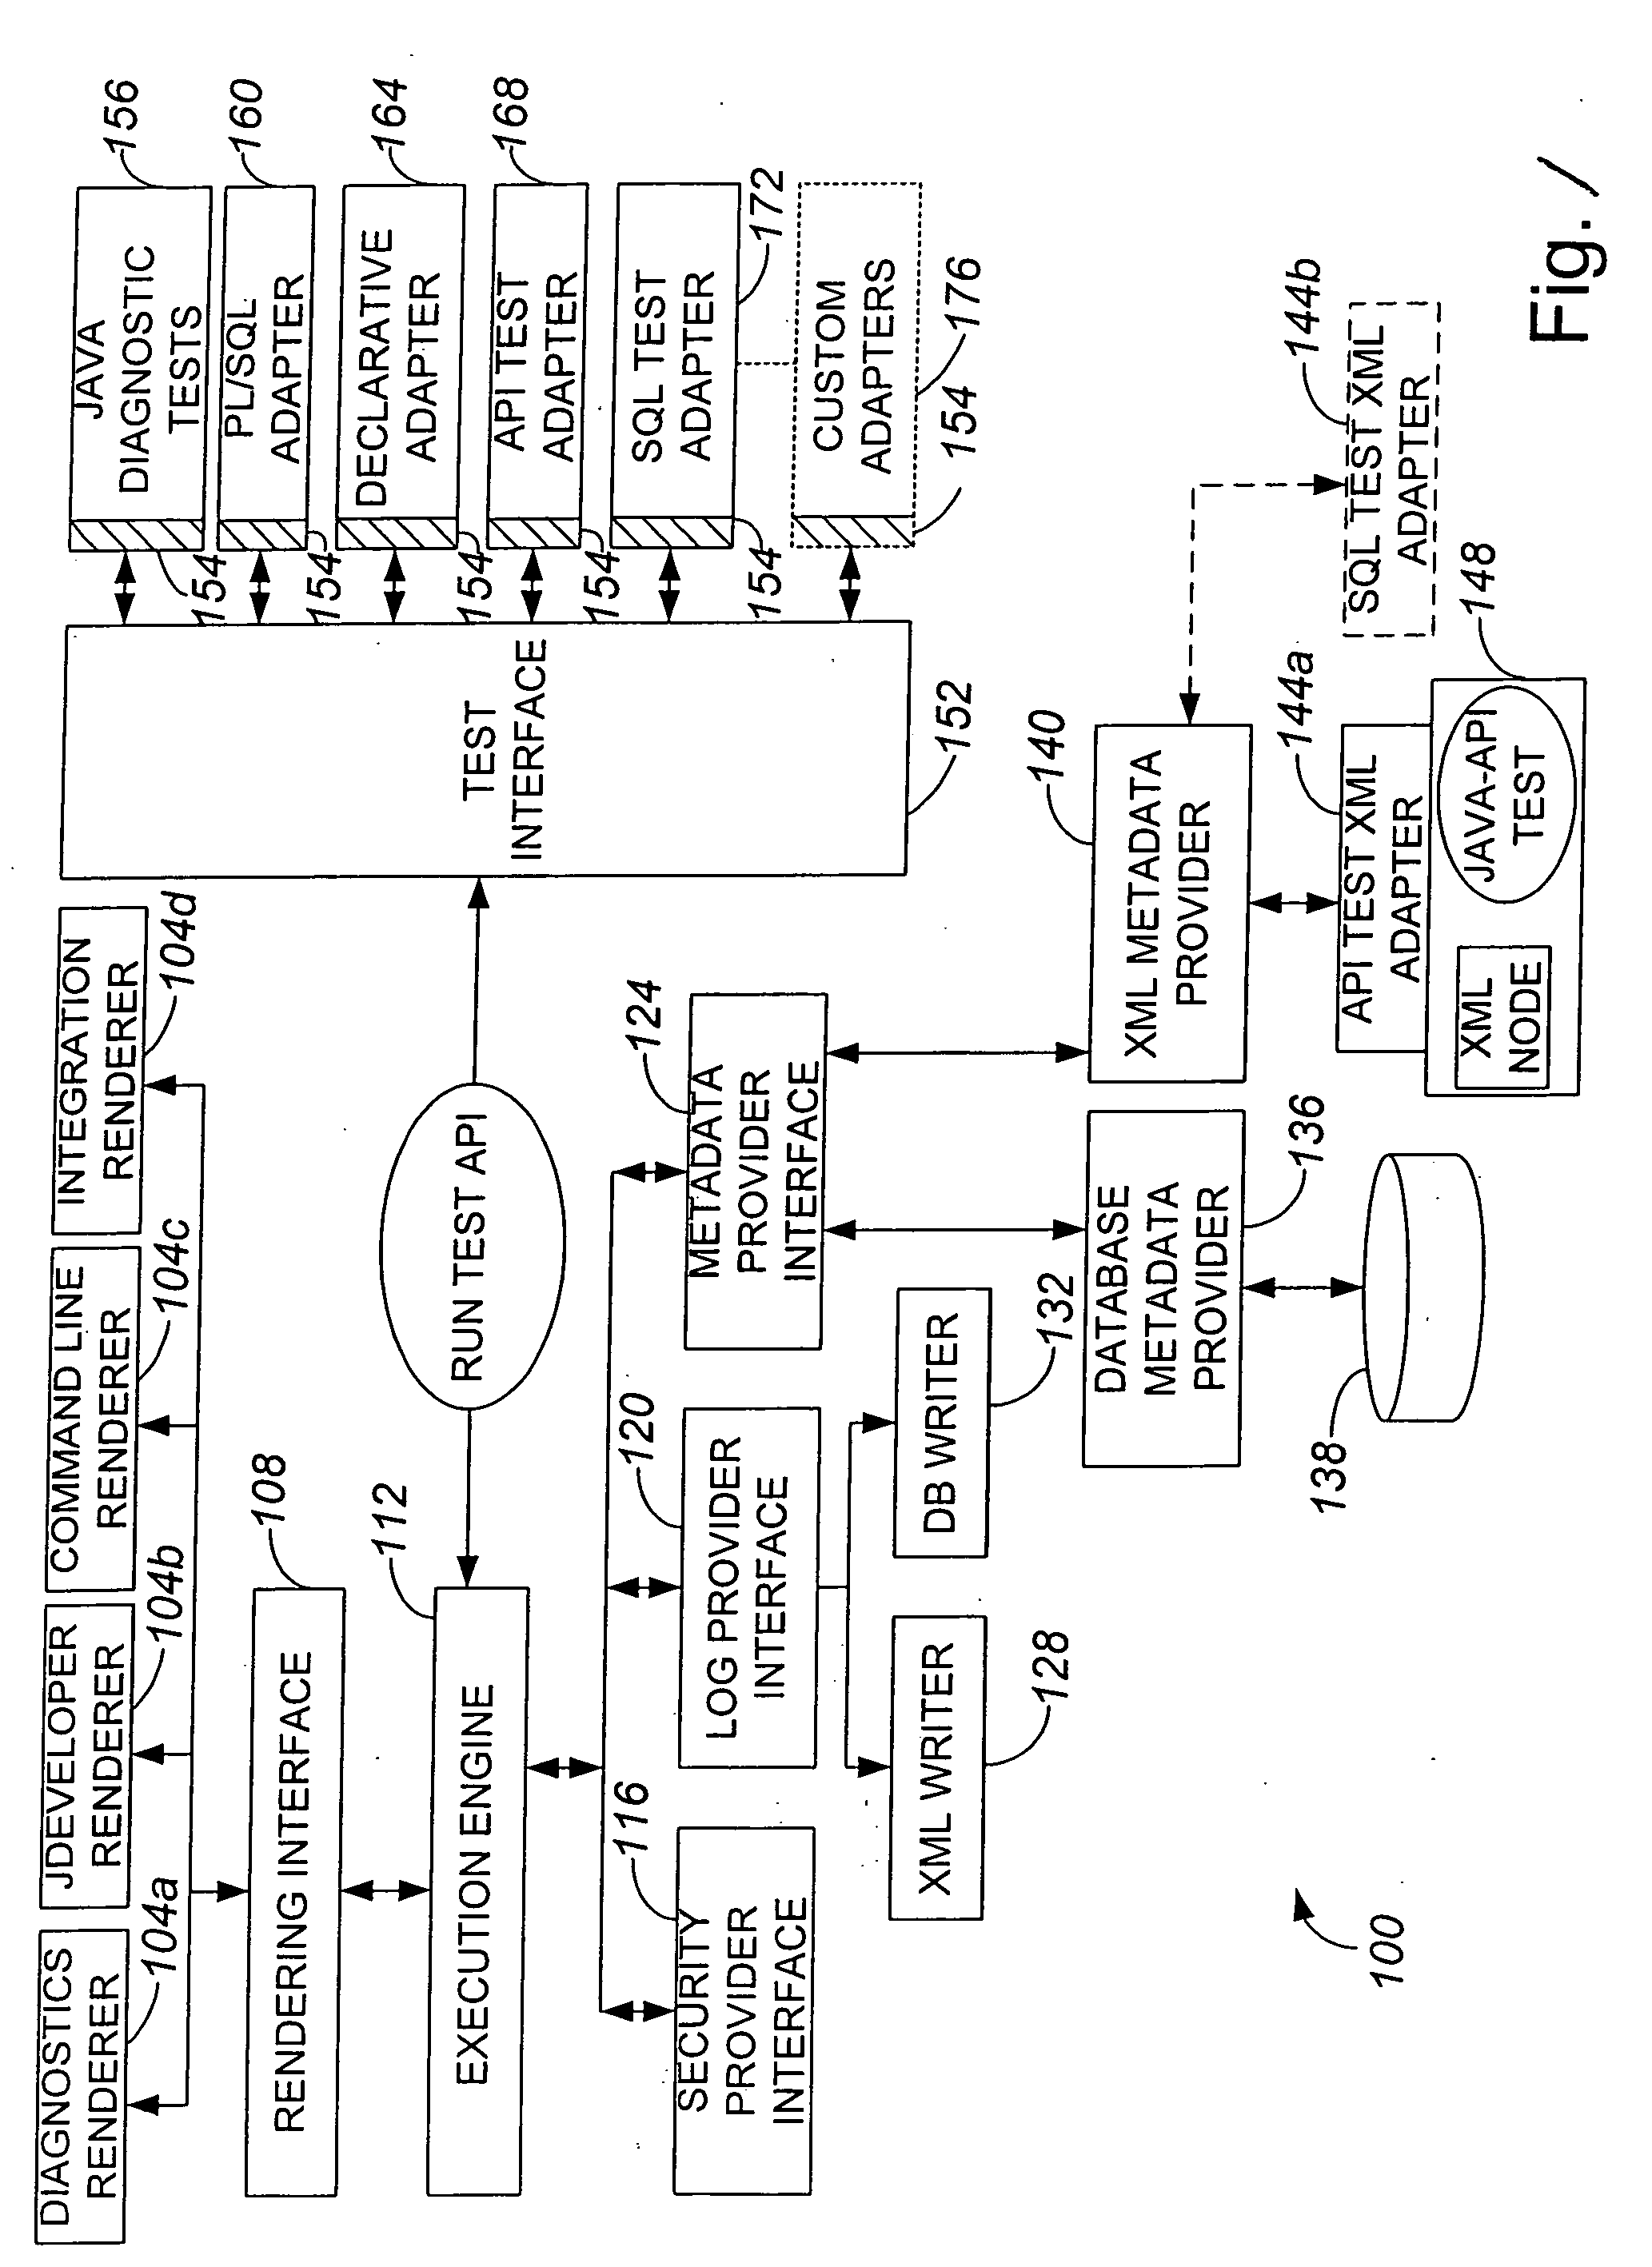 Integration functionality for a test tool for application programming interfaces